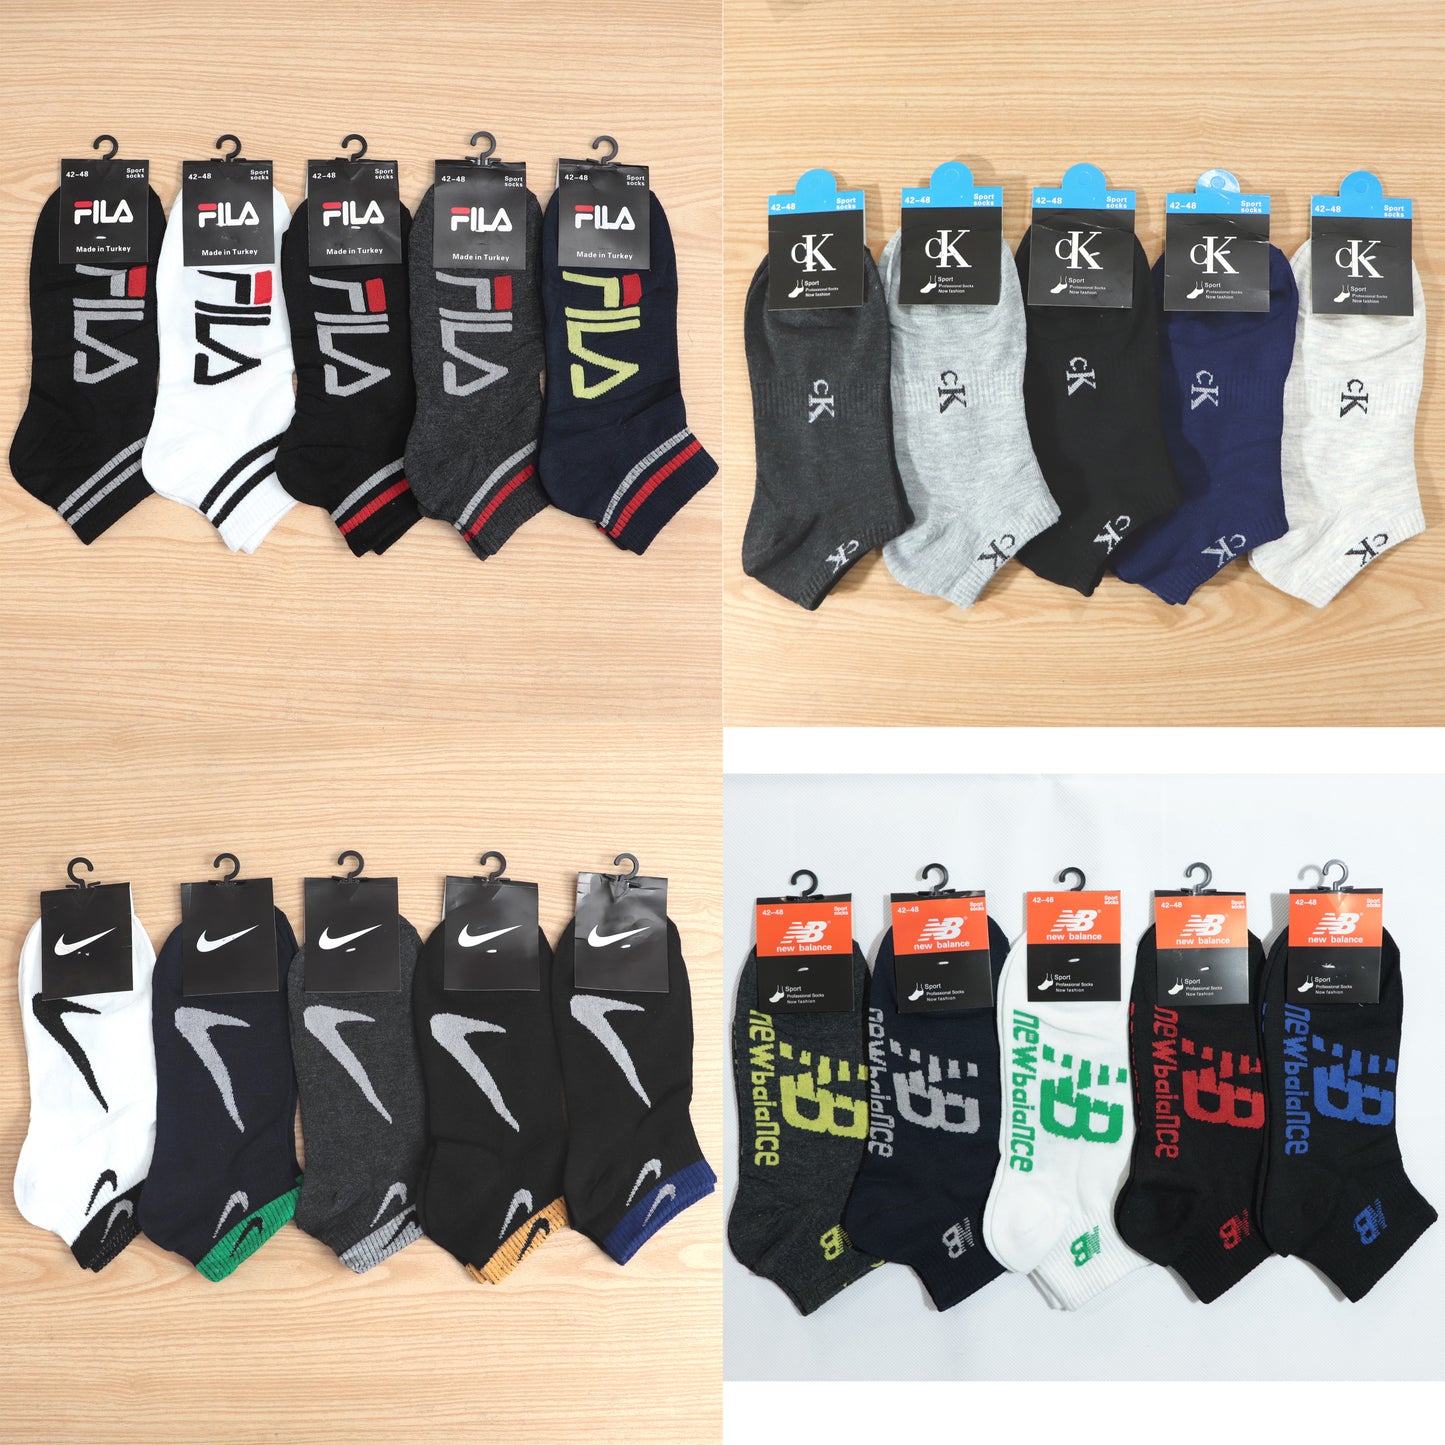 SKS-A2-BUNDLE OFFER 4 PACKS OF "PACK OF 5" IMPORTED ANKLE SOCKS (20 PAIRS)